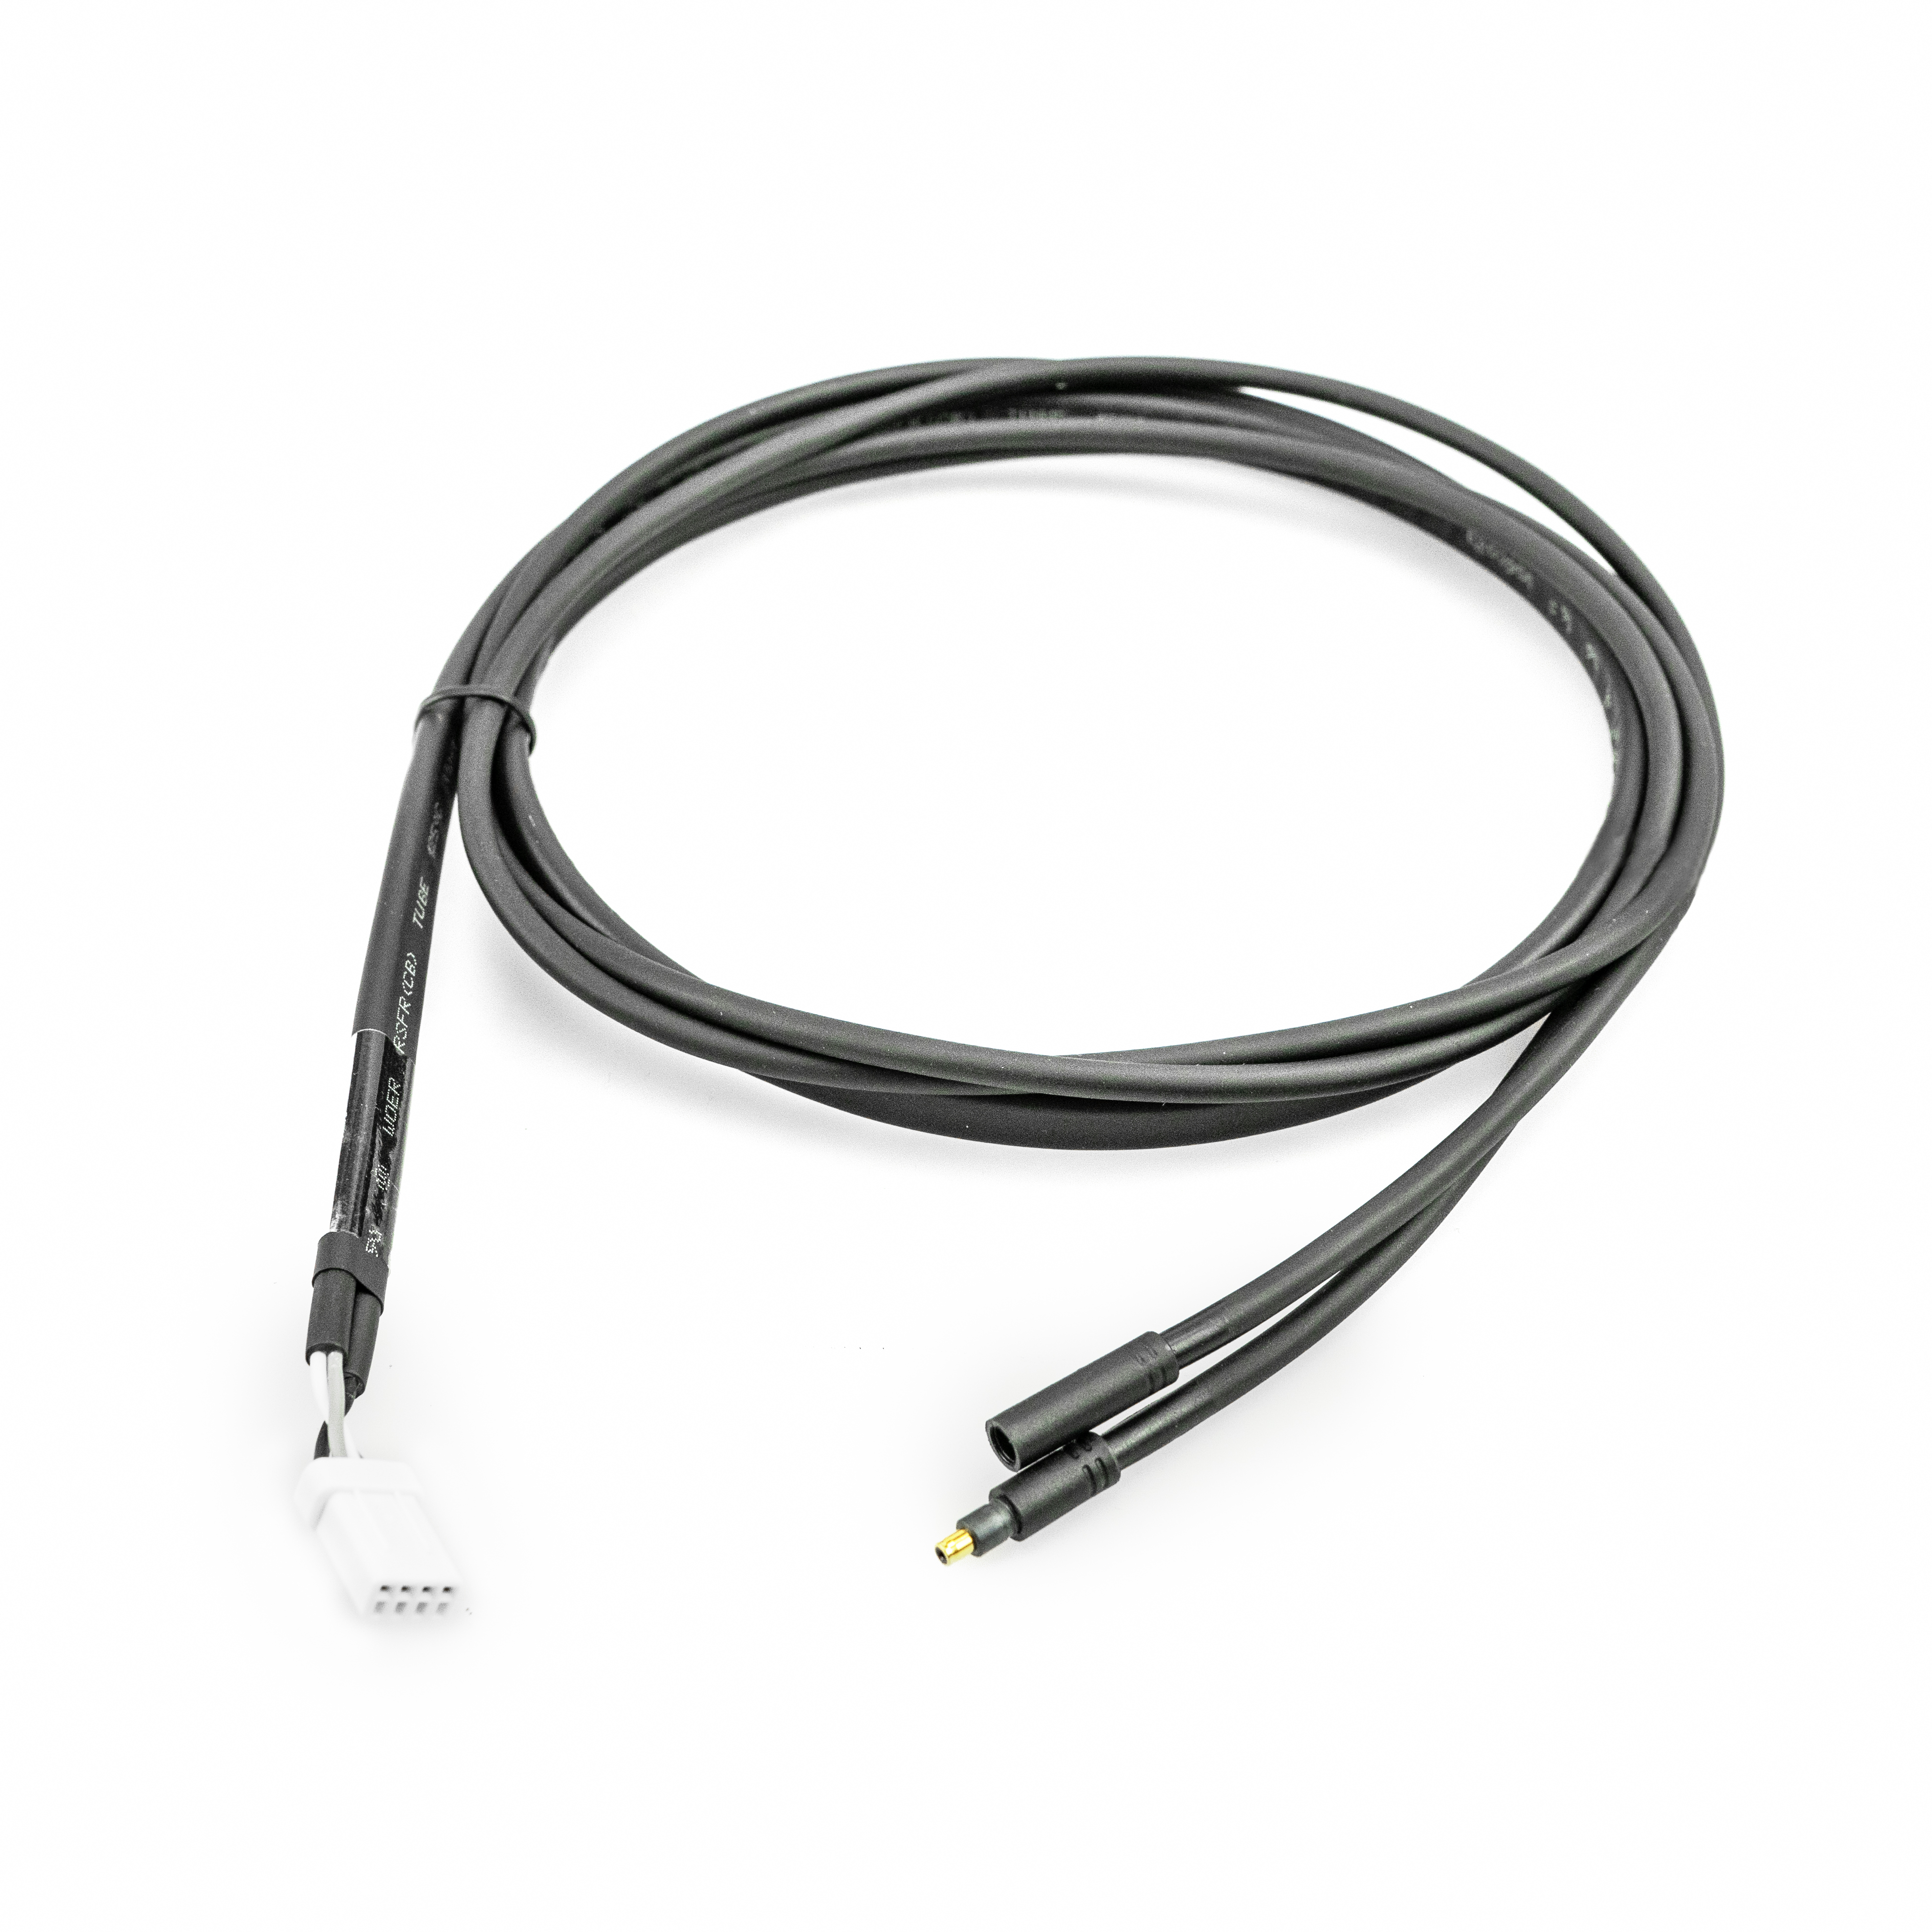 FIT light cable with JST connector for headlights with connector and high beam connection